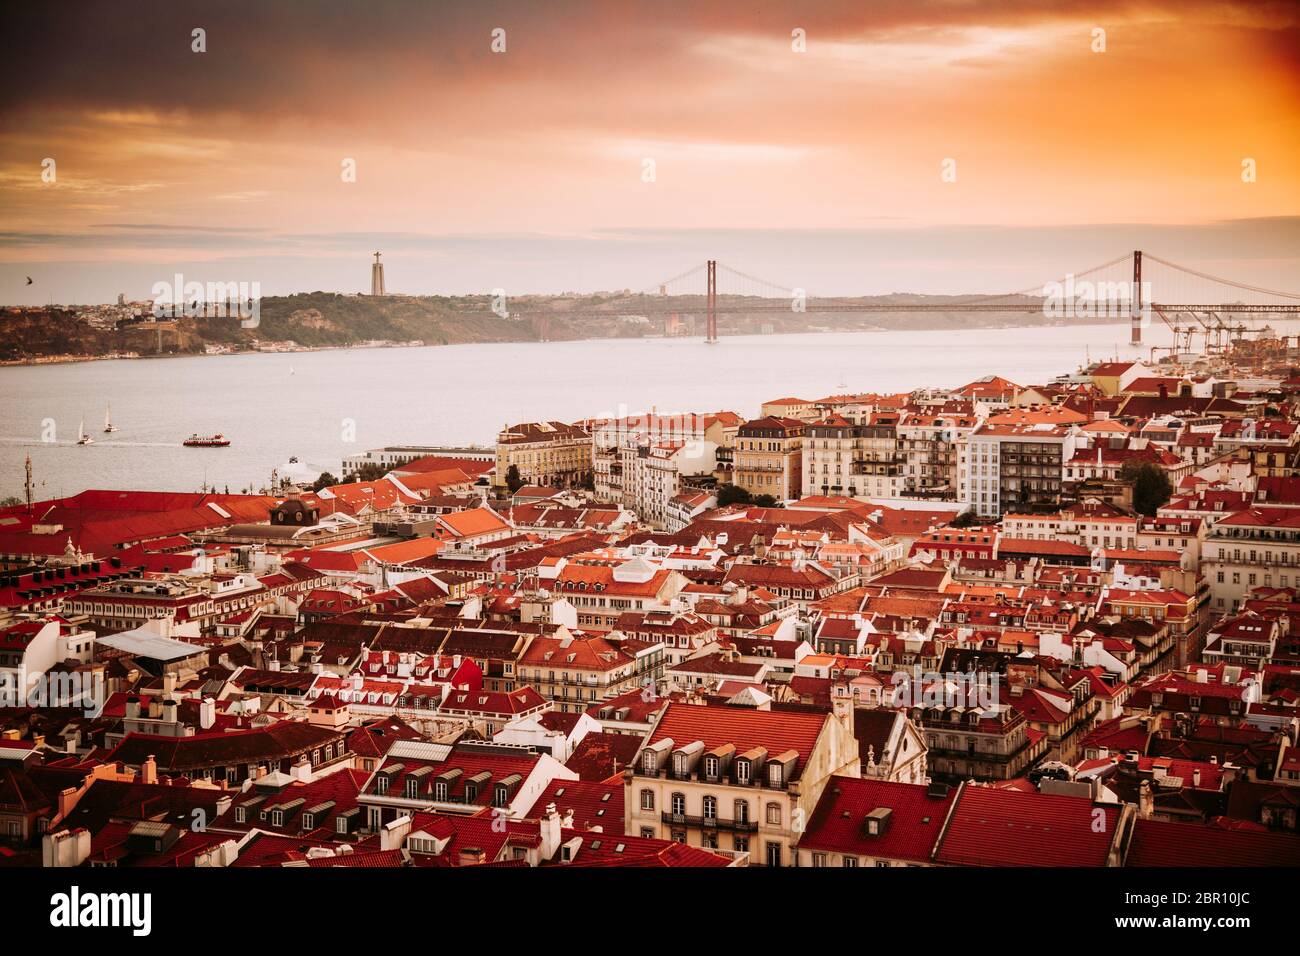 Beautiful panorama of old town Baixa district and Tagus River in Lisbon city during sunset, seen from Sao Jorge Castle hill, Portugal Stock Photo